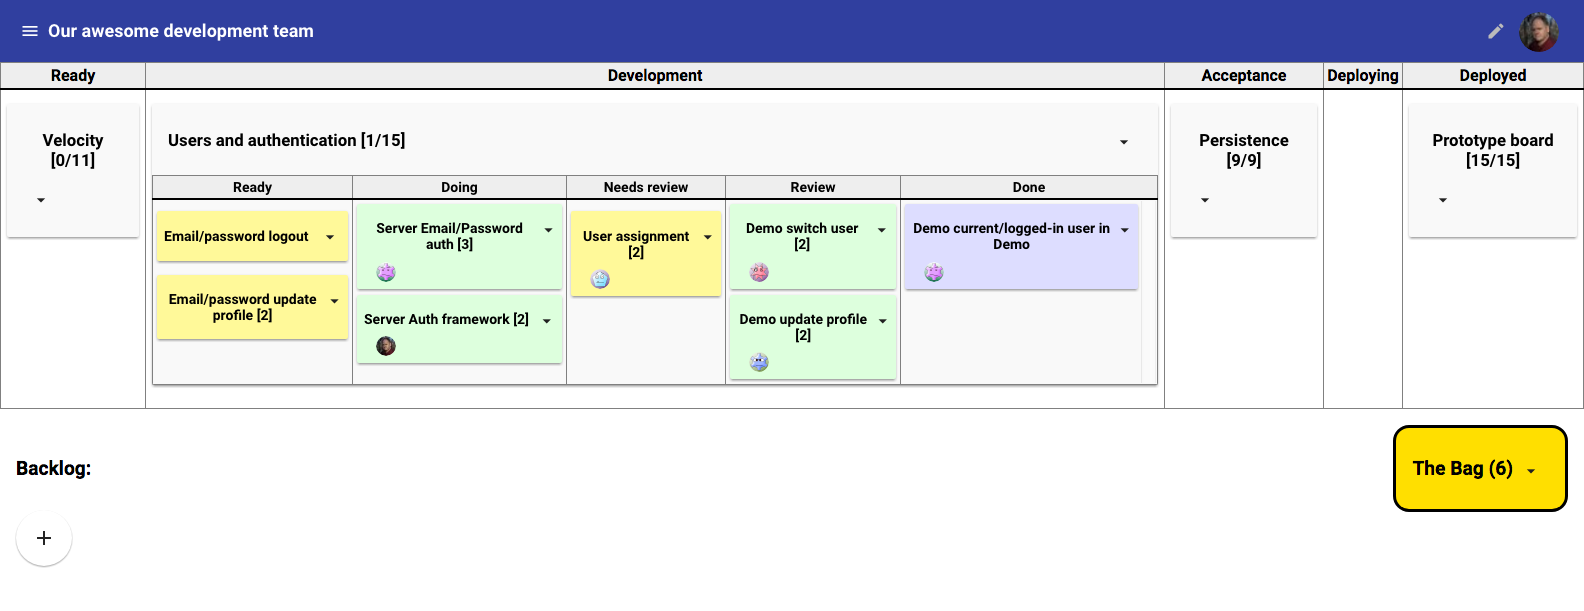 Example showing a Valuenator two-tiered Kanban board.